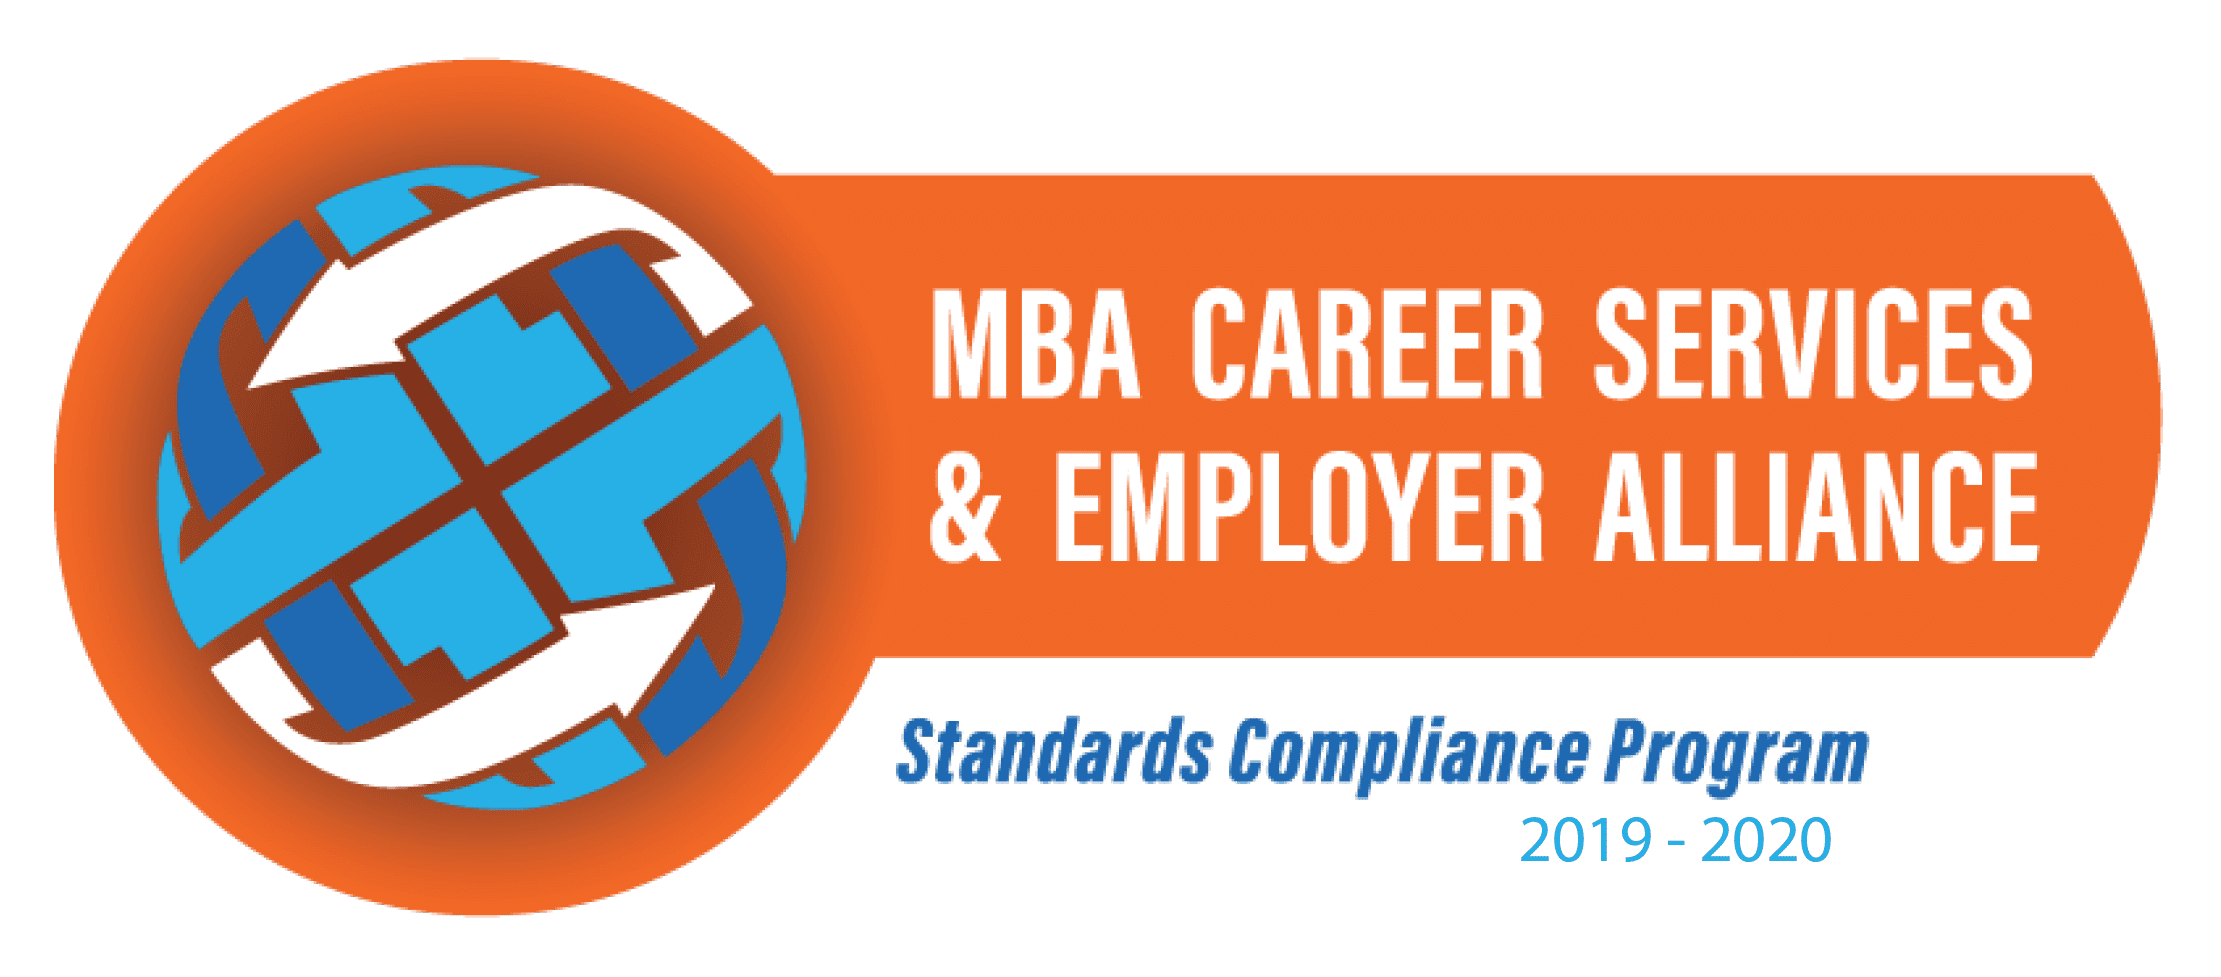 MBA Career Services & Employer Alliance Standards Compliance Program badge for 2019–2020